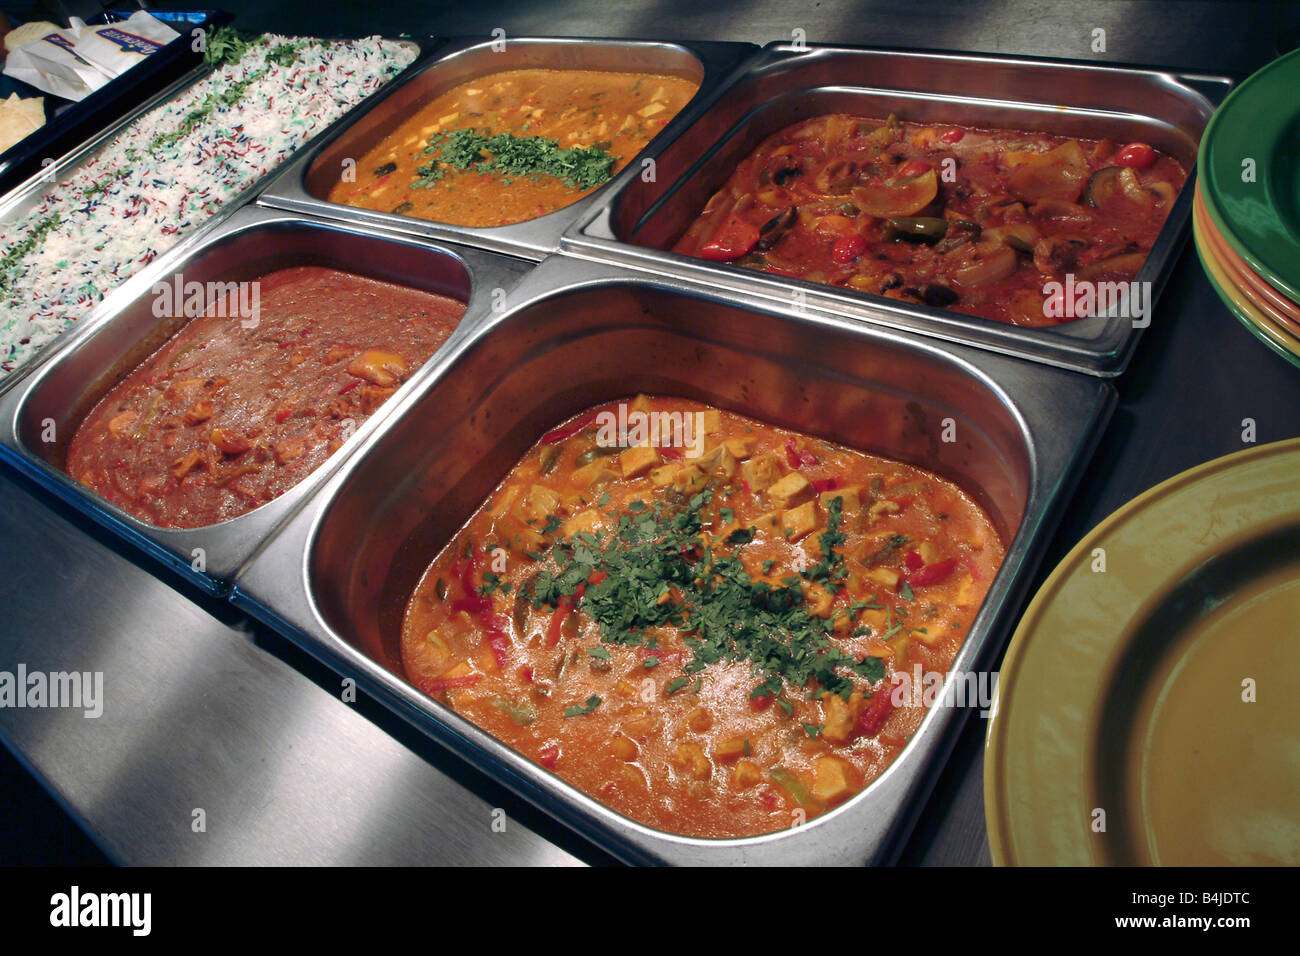 Curries awaiting serving in a canteen servery bain marie Stock Photo